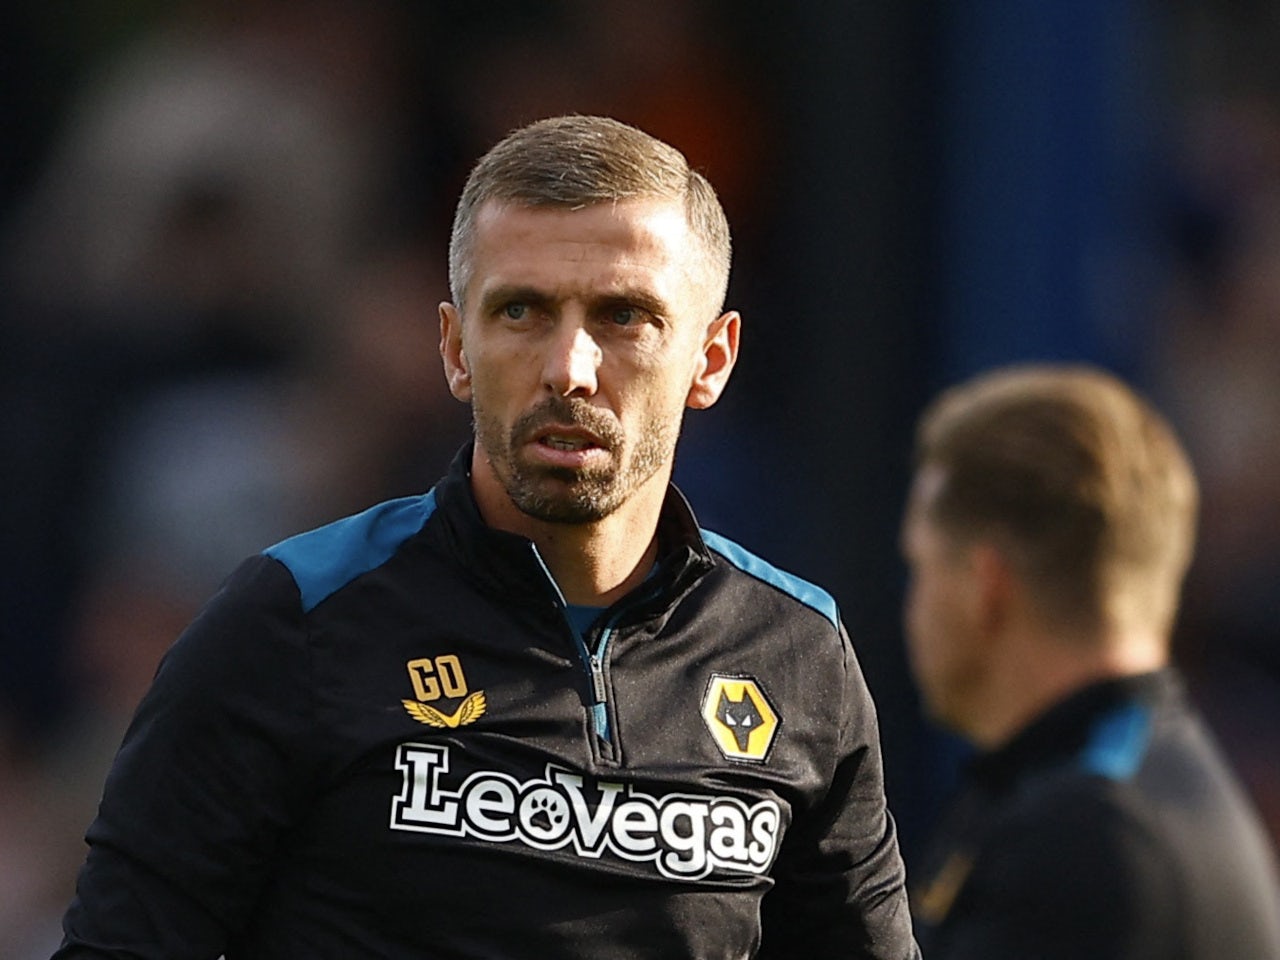 Wolves boss Gary O'Neil: 'PGMOL chief Howard Webb admitted Sheffield United penalty call was wrong'